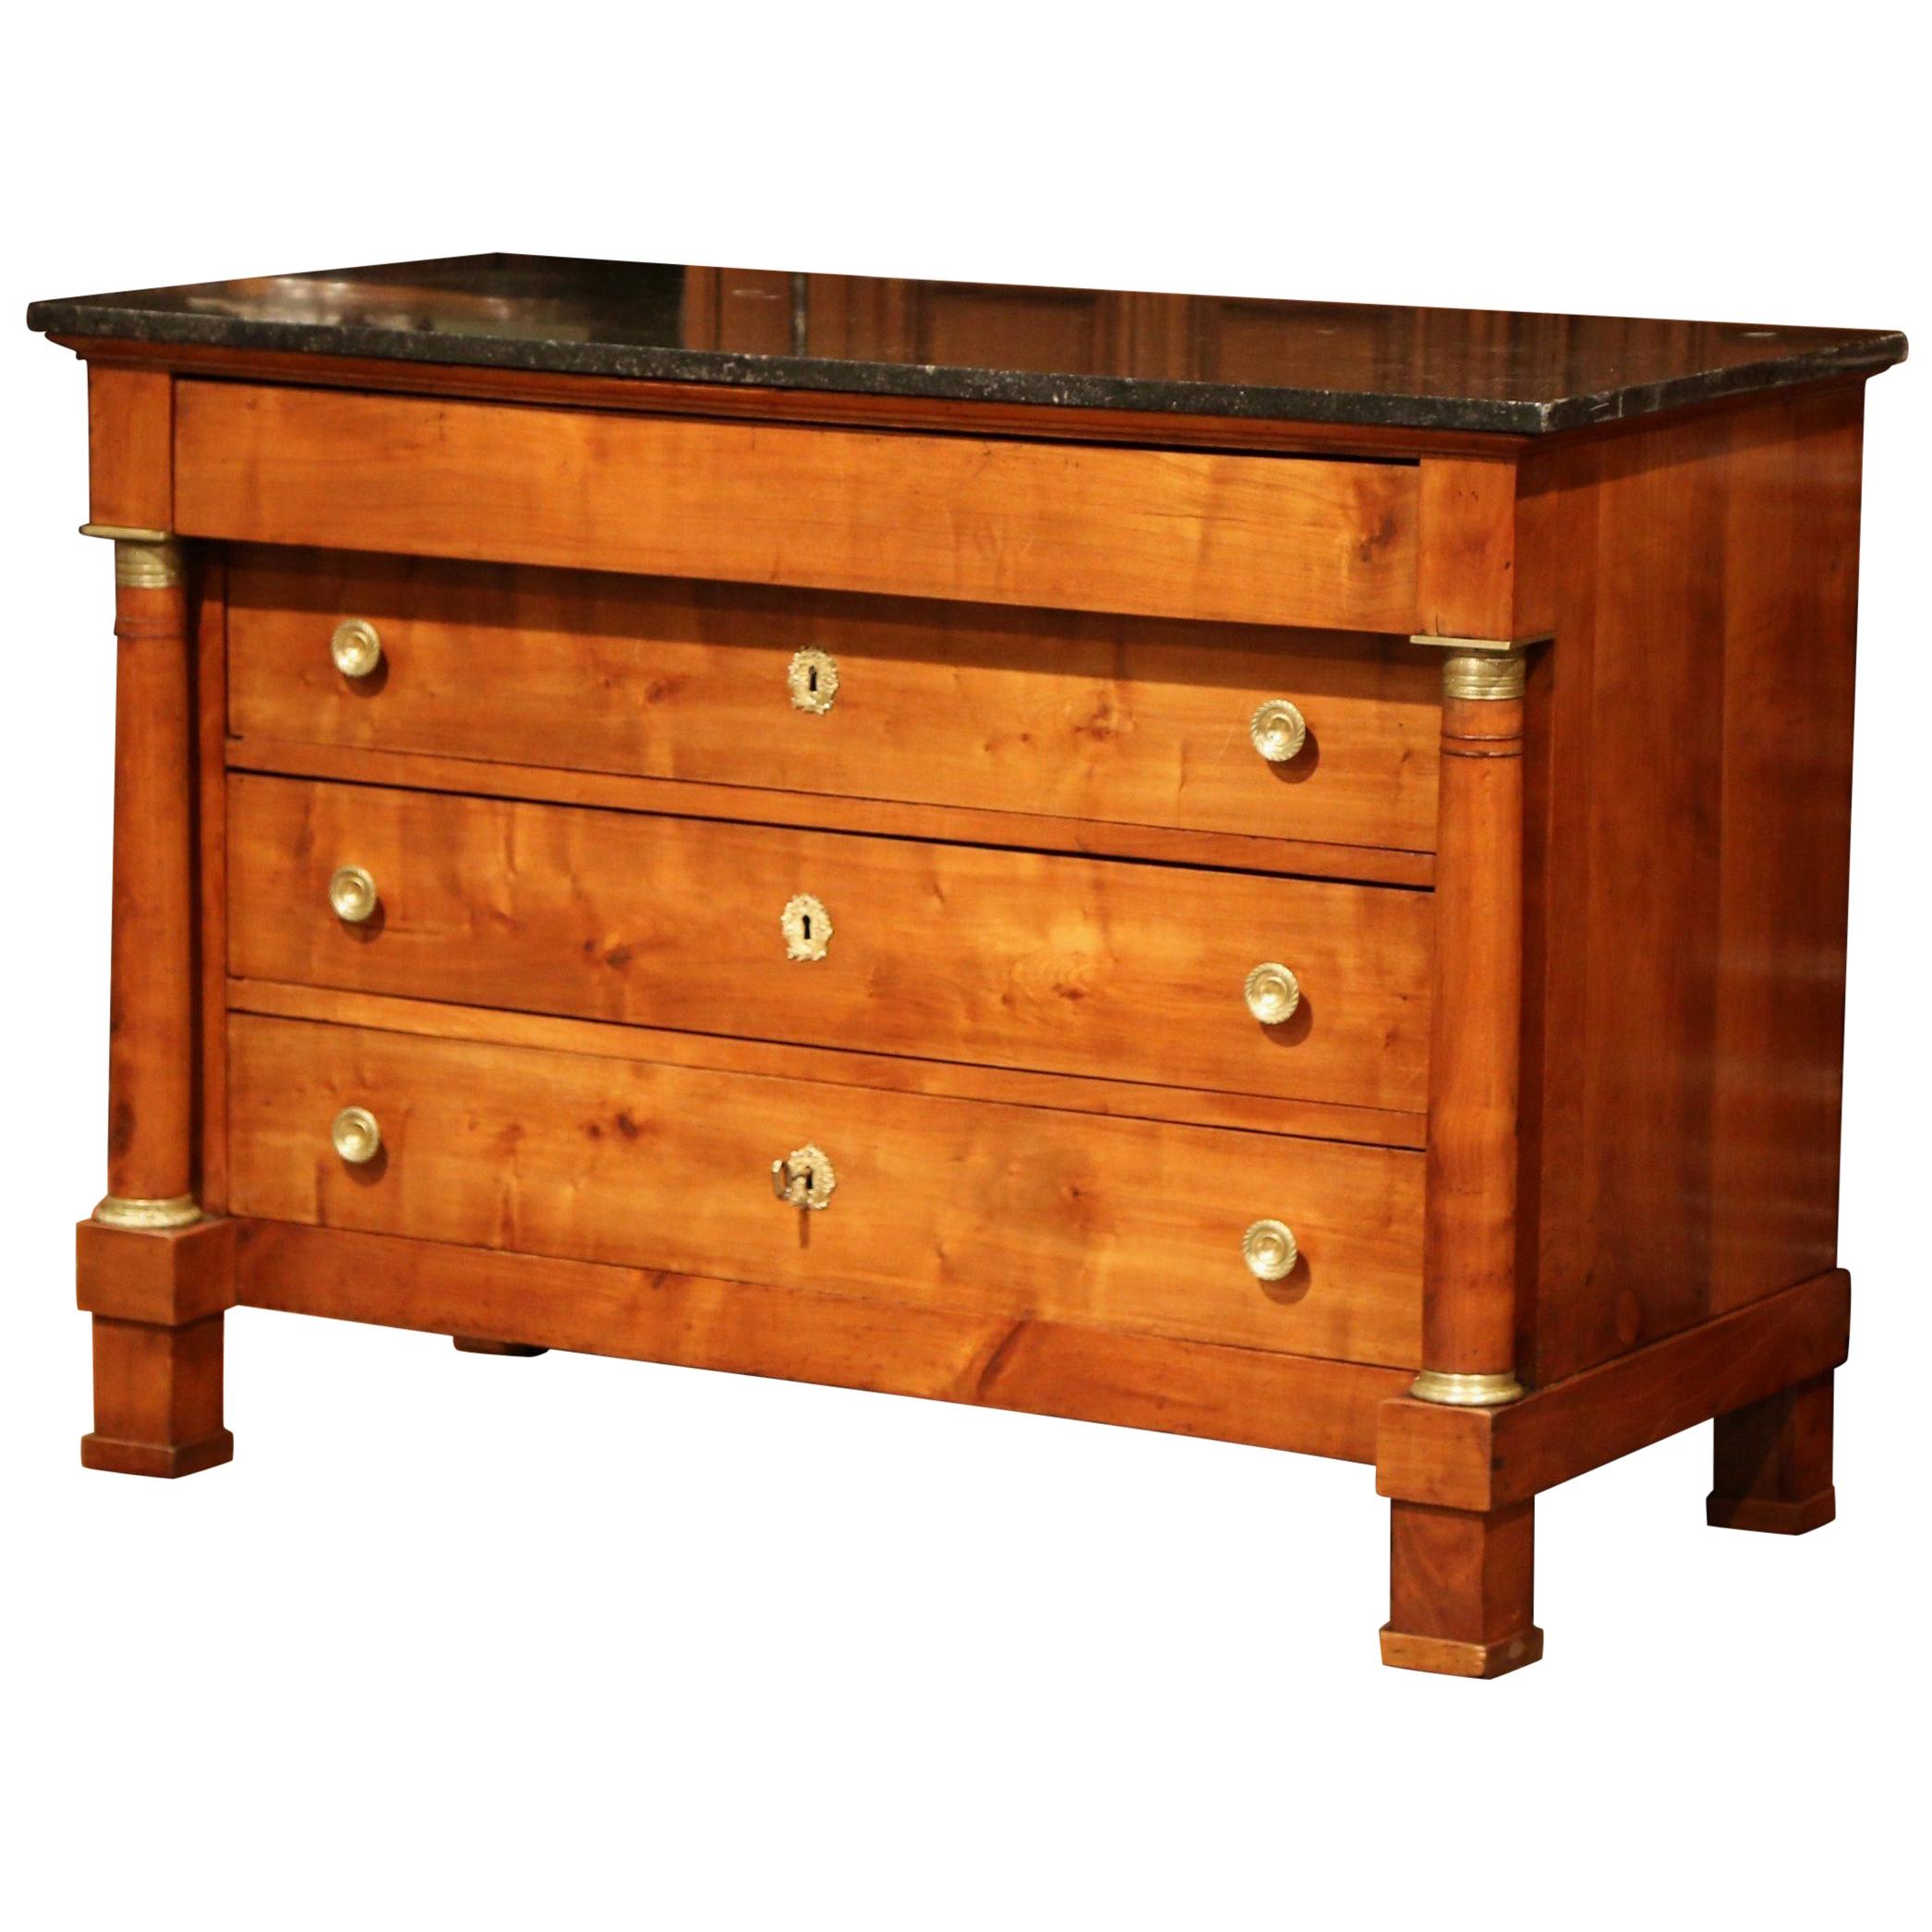 19th Century French Empire Walnut Commode Chest of Drawers with Black Marble Top